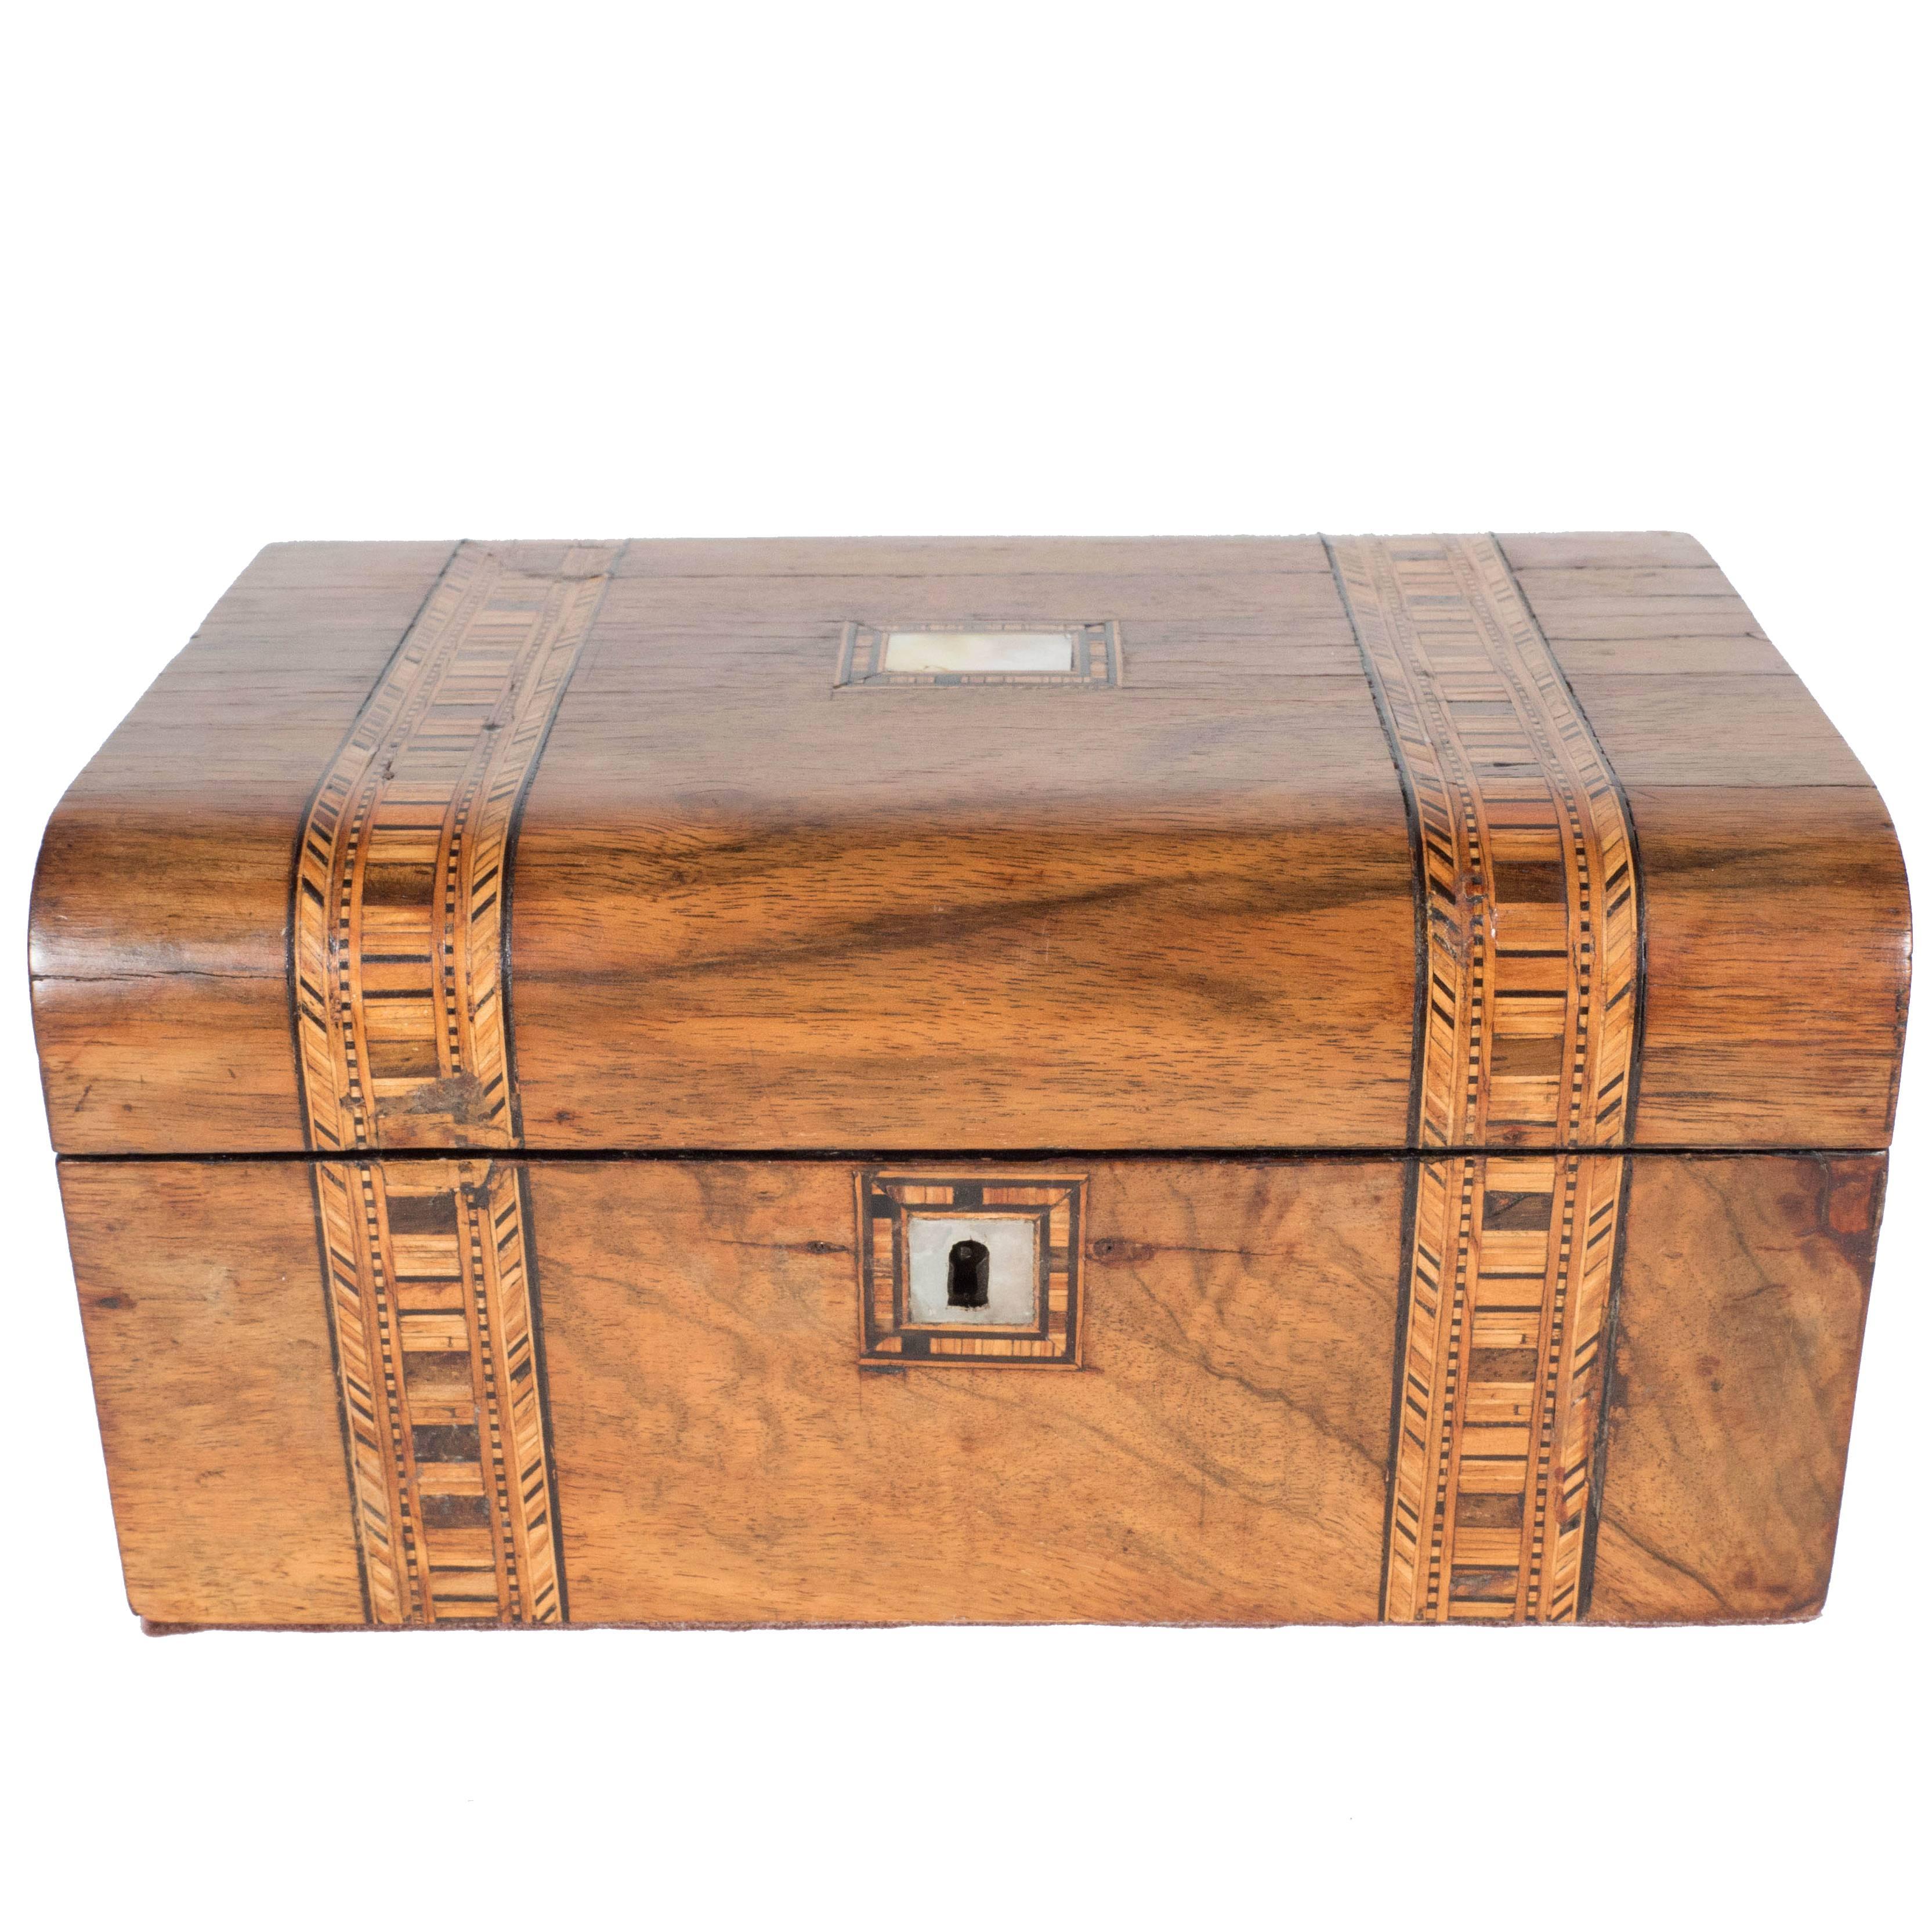 Arts and Crafts Jewelry Box with Inlaid Wood and Mother-of-Pearl Detailing